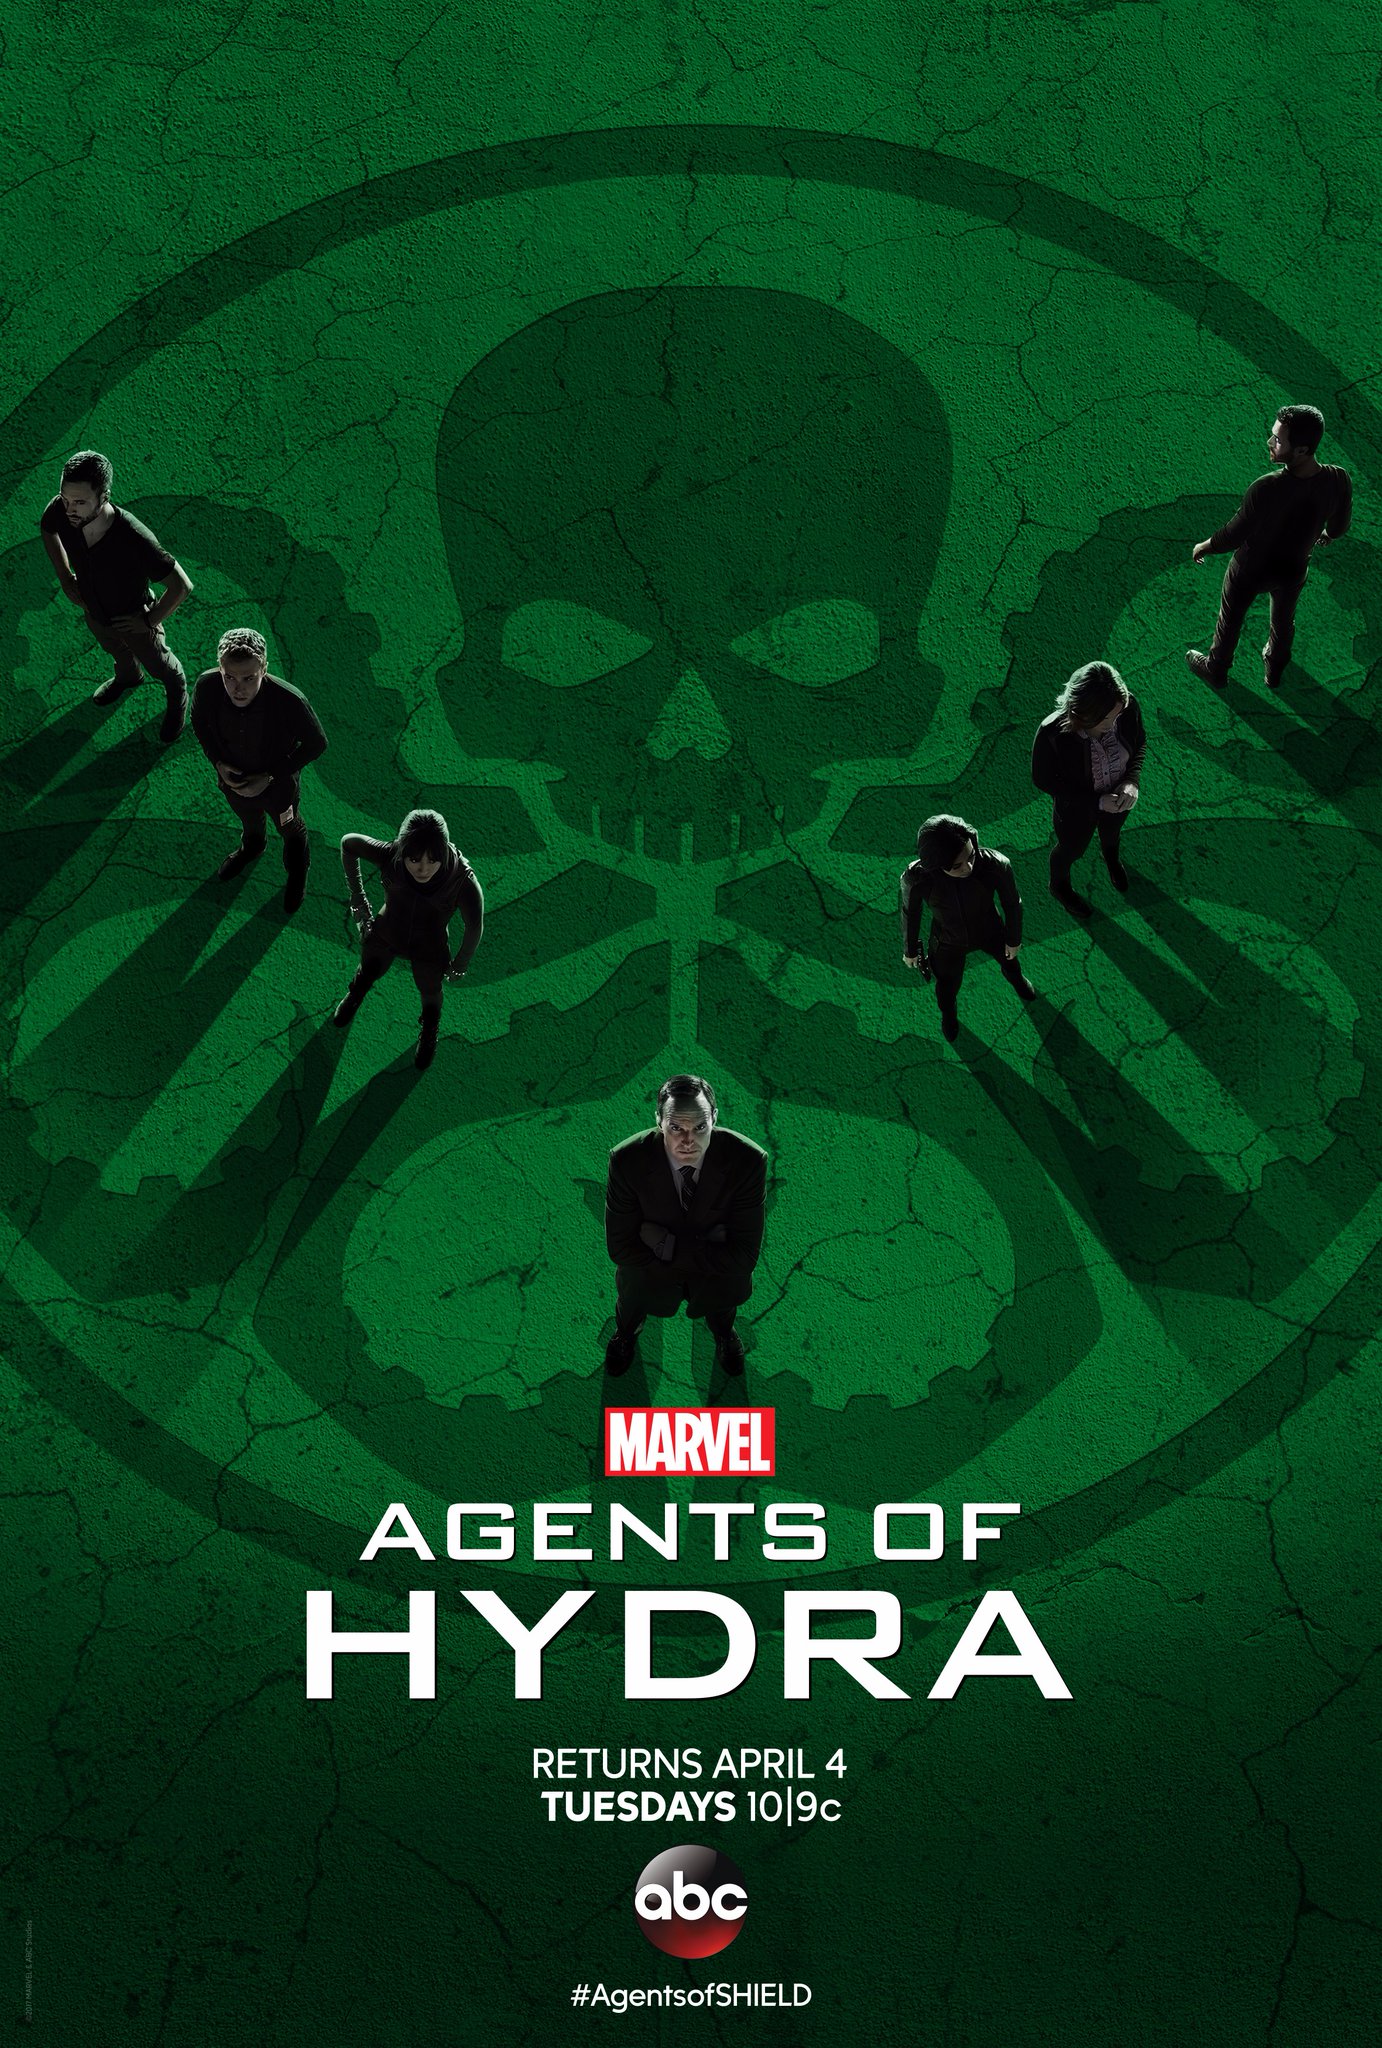 agents hydra 2 Agents of SHIELD Posters Tease Agents of HYDRA